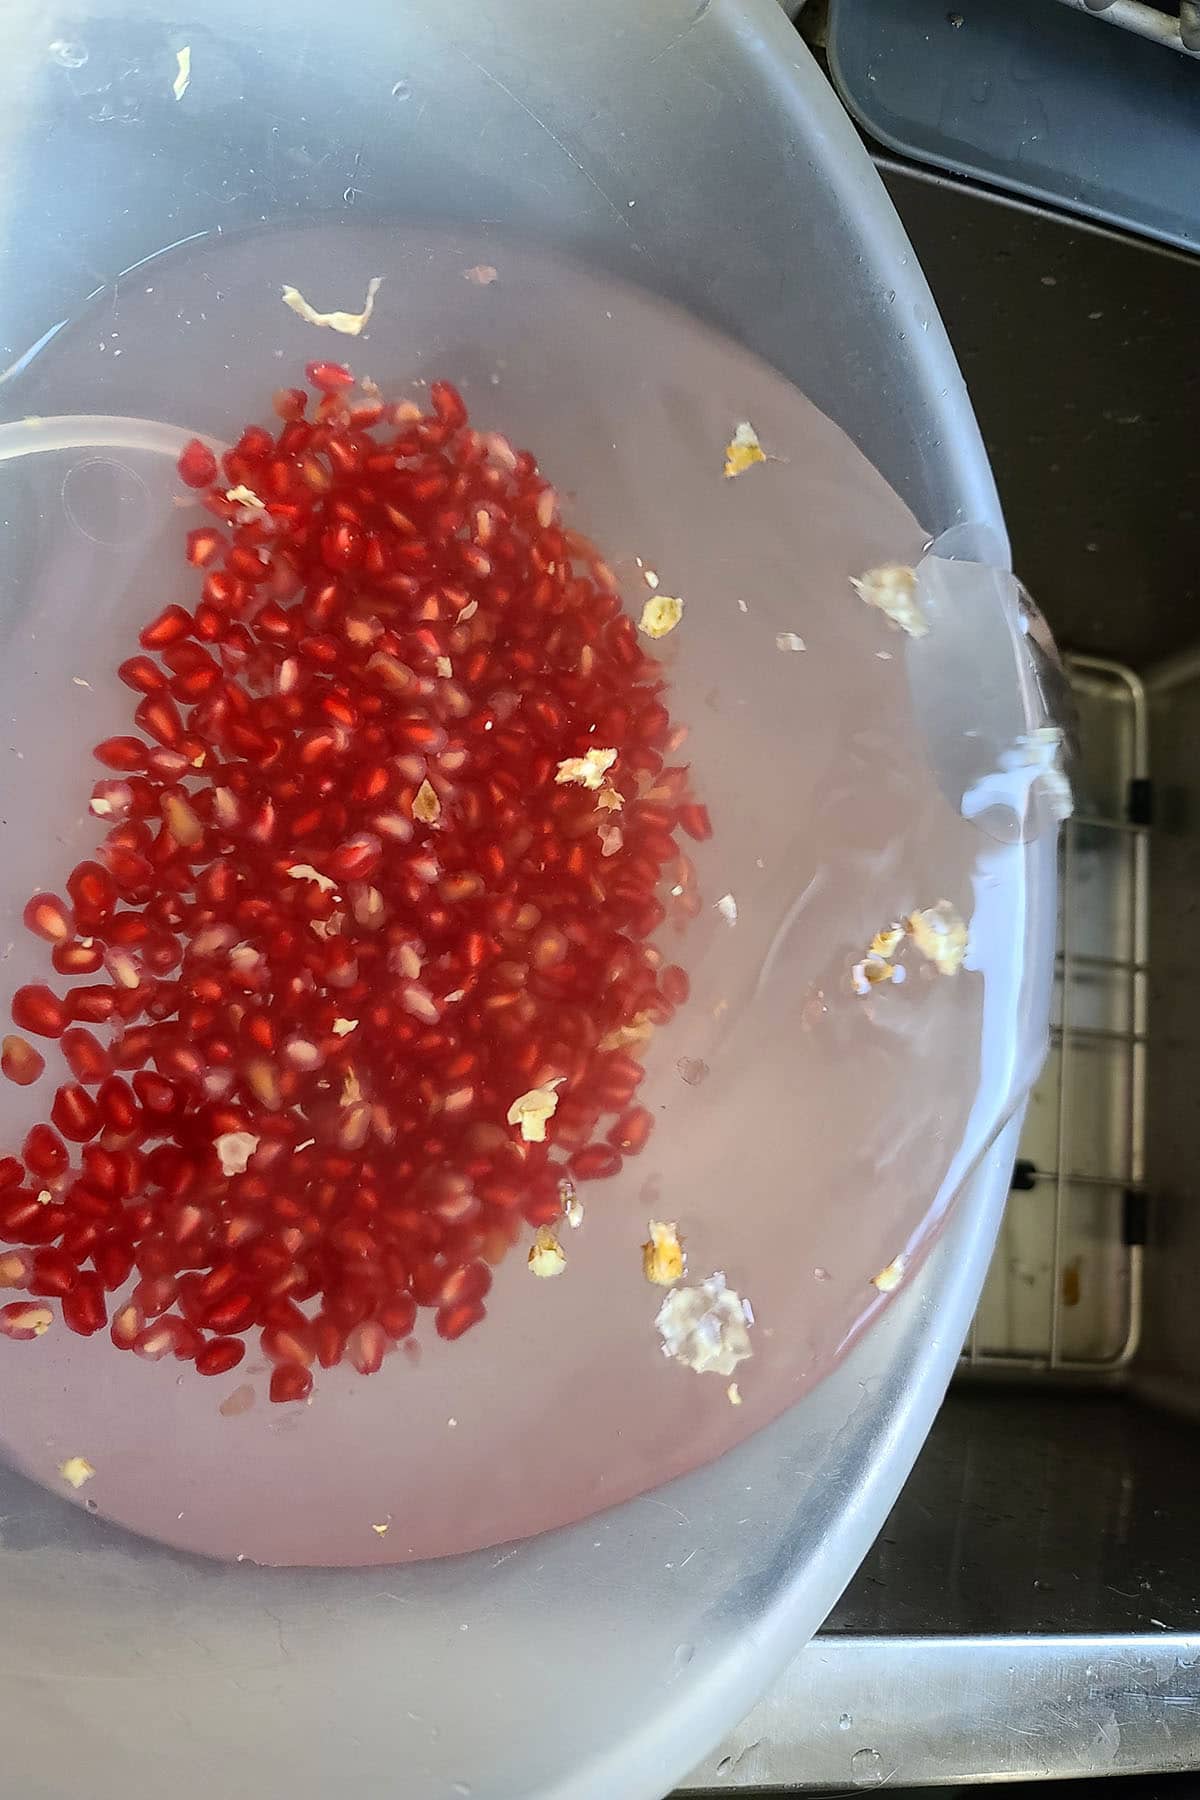 Water and bits of membrane being poured off the pomegranate arils.